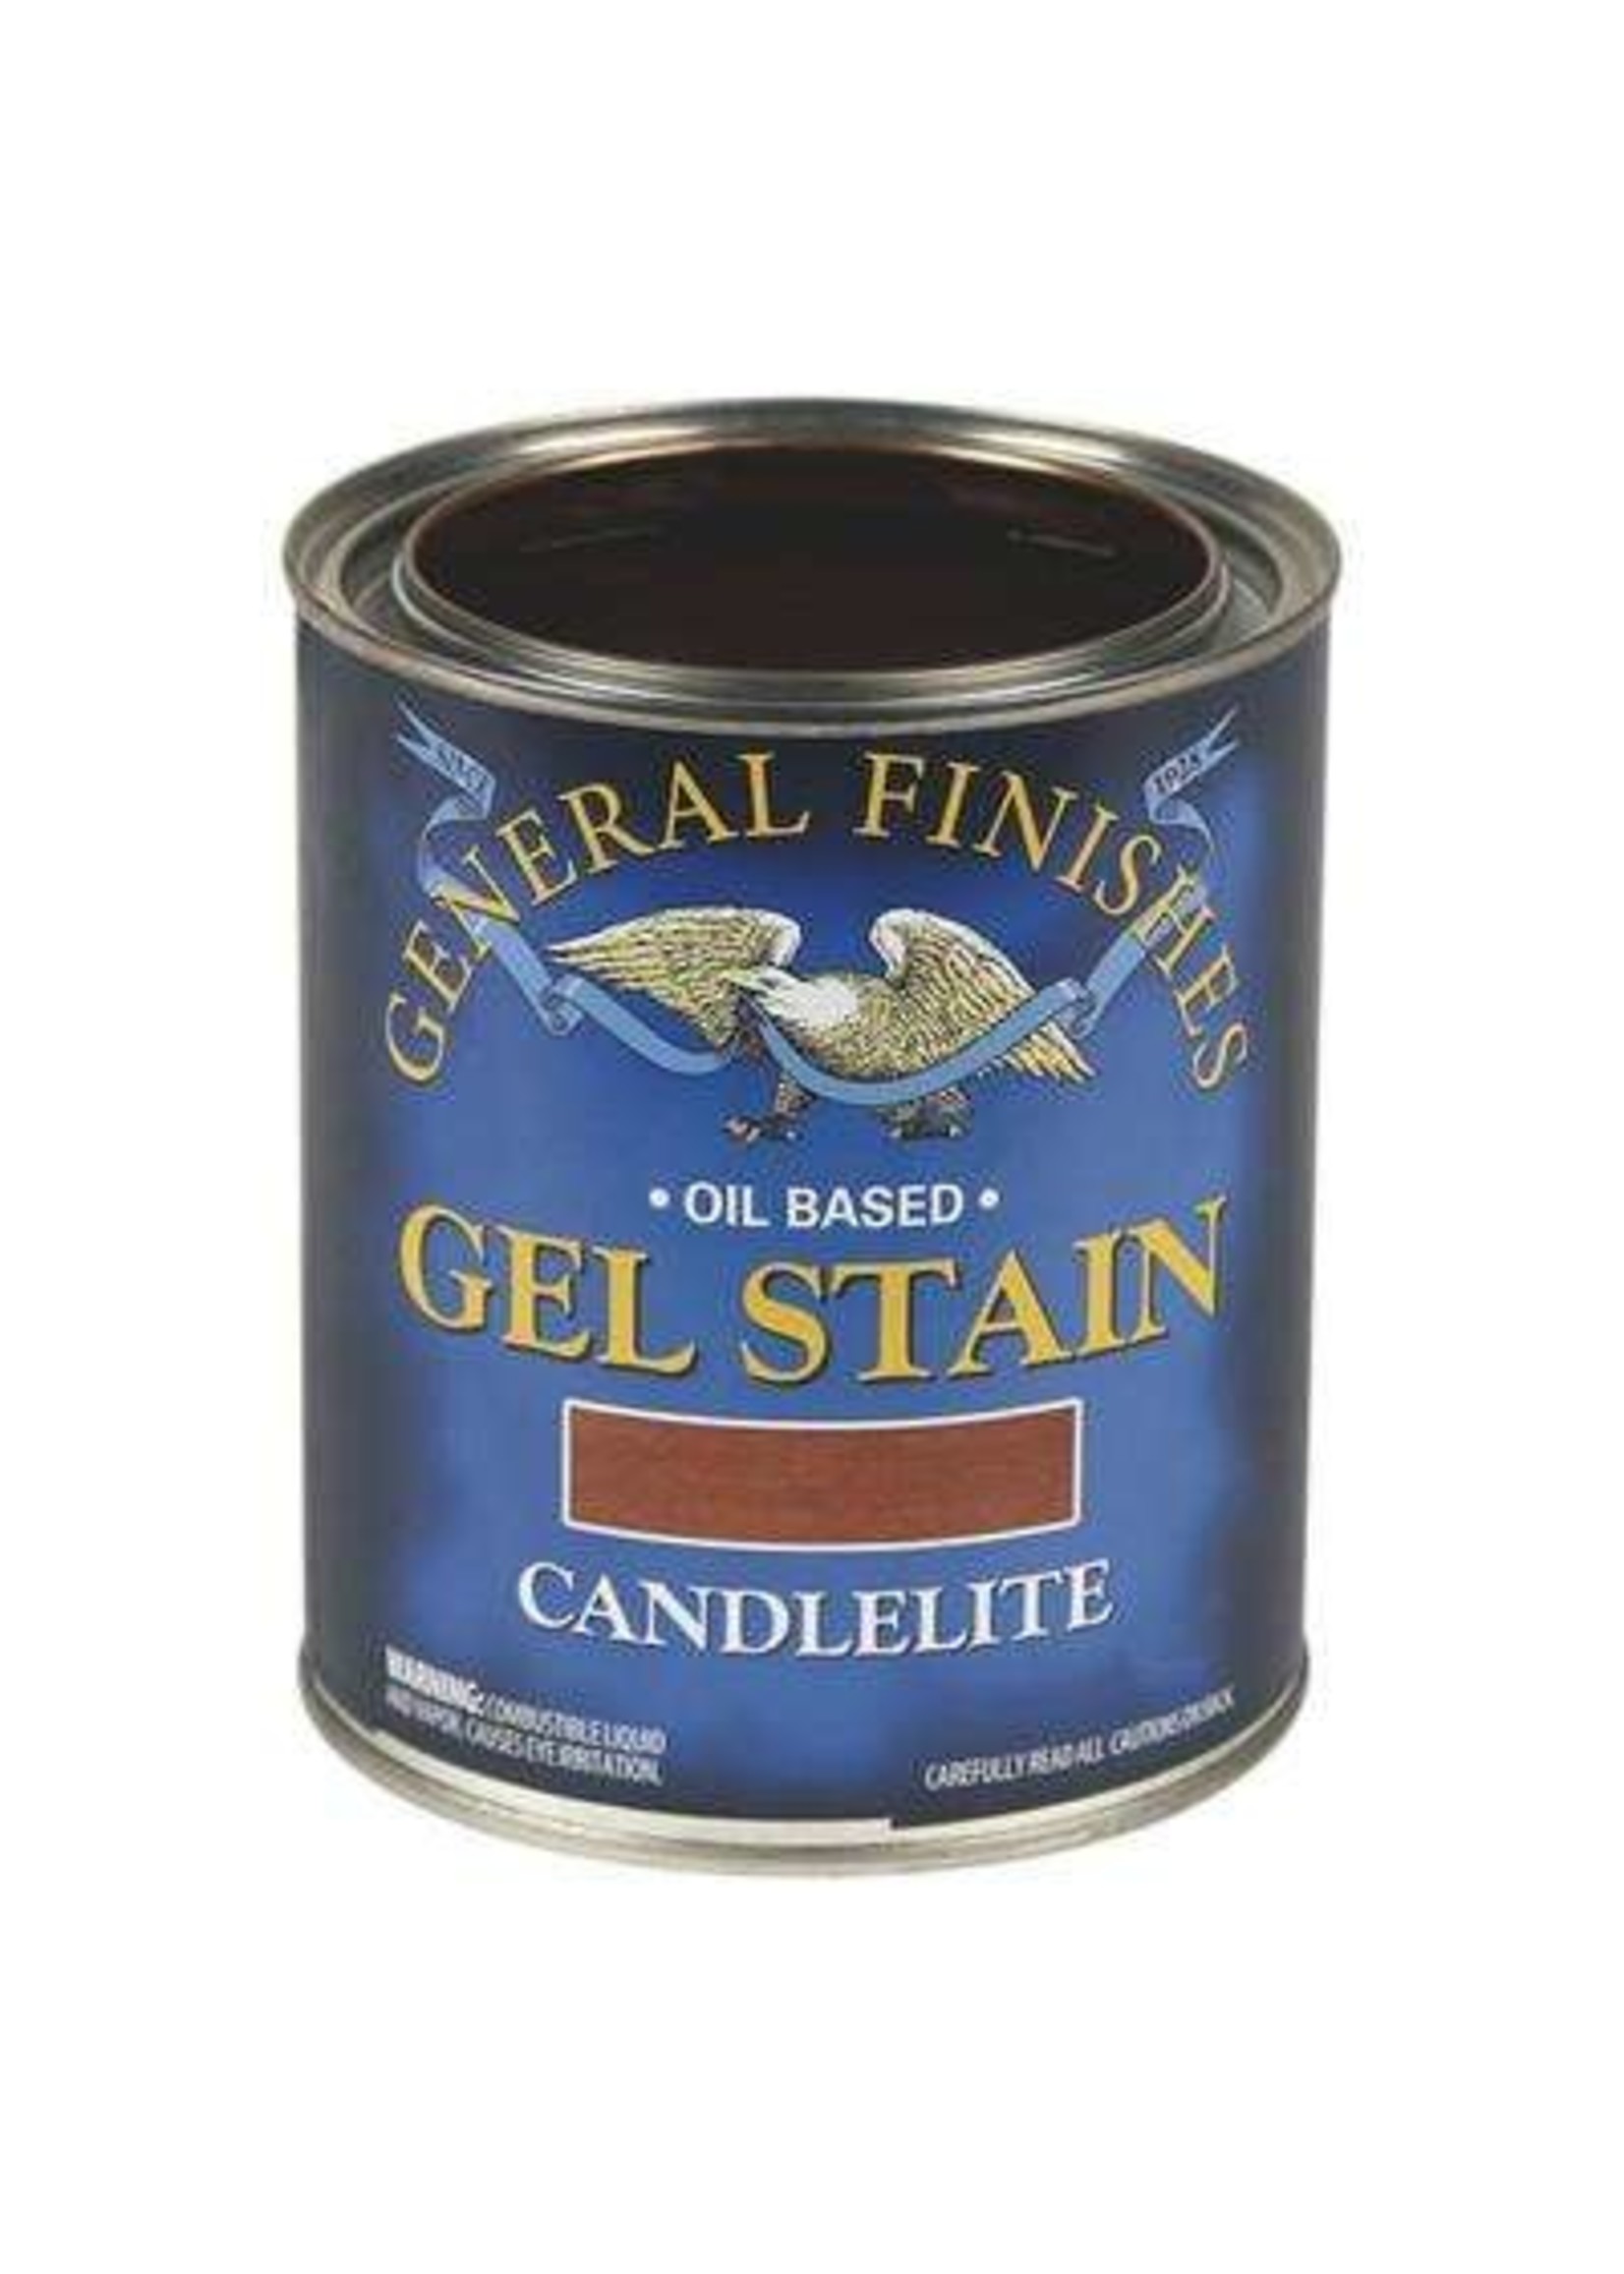 General Finishes Candlelite General Finishes Gel Stain